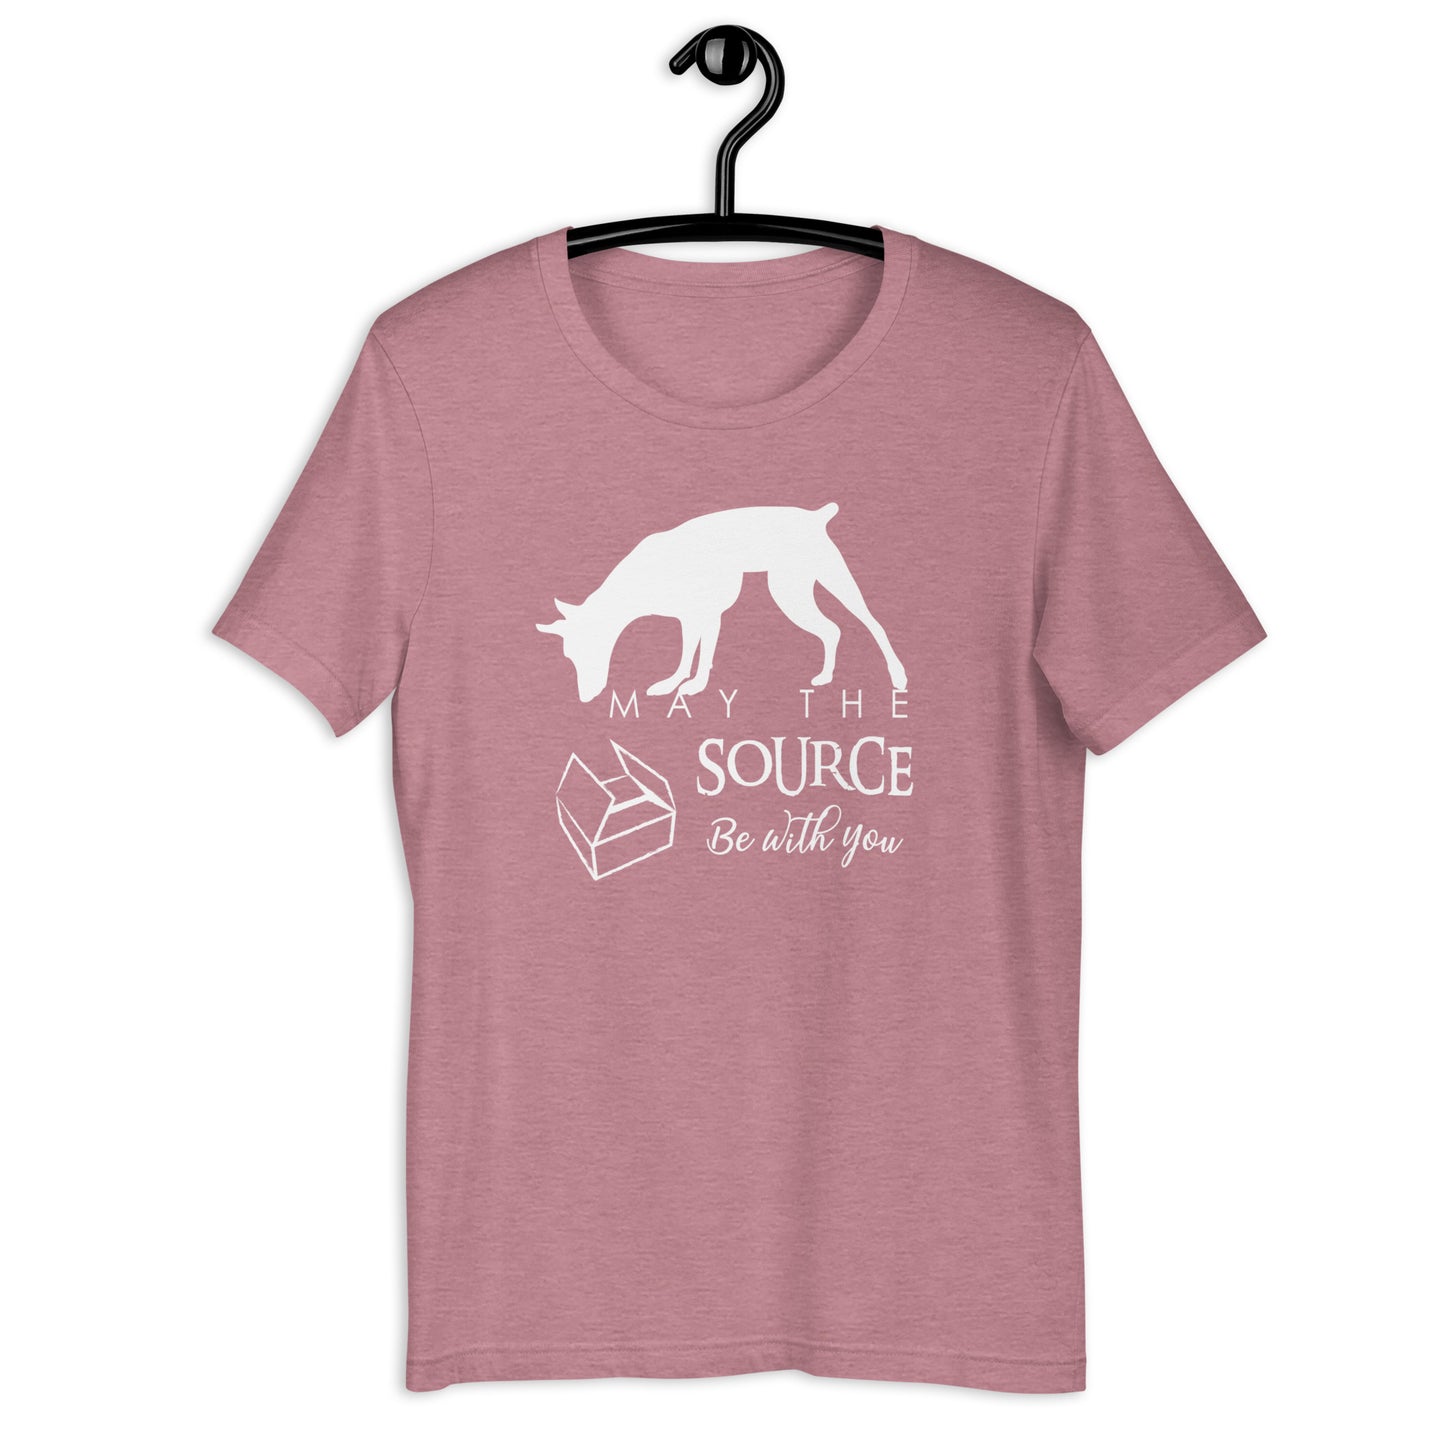 MAY THE SOURCE BE WITH - - DOBIE - Unisex t-shirt